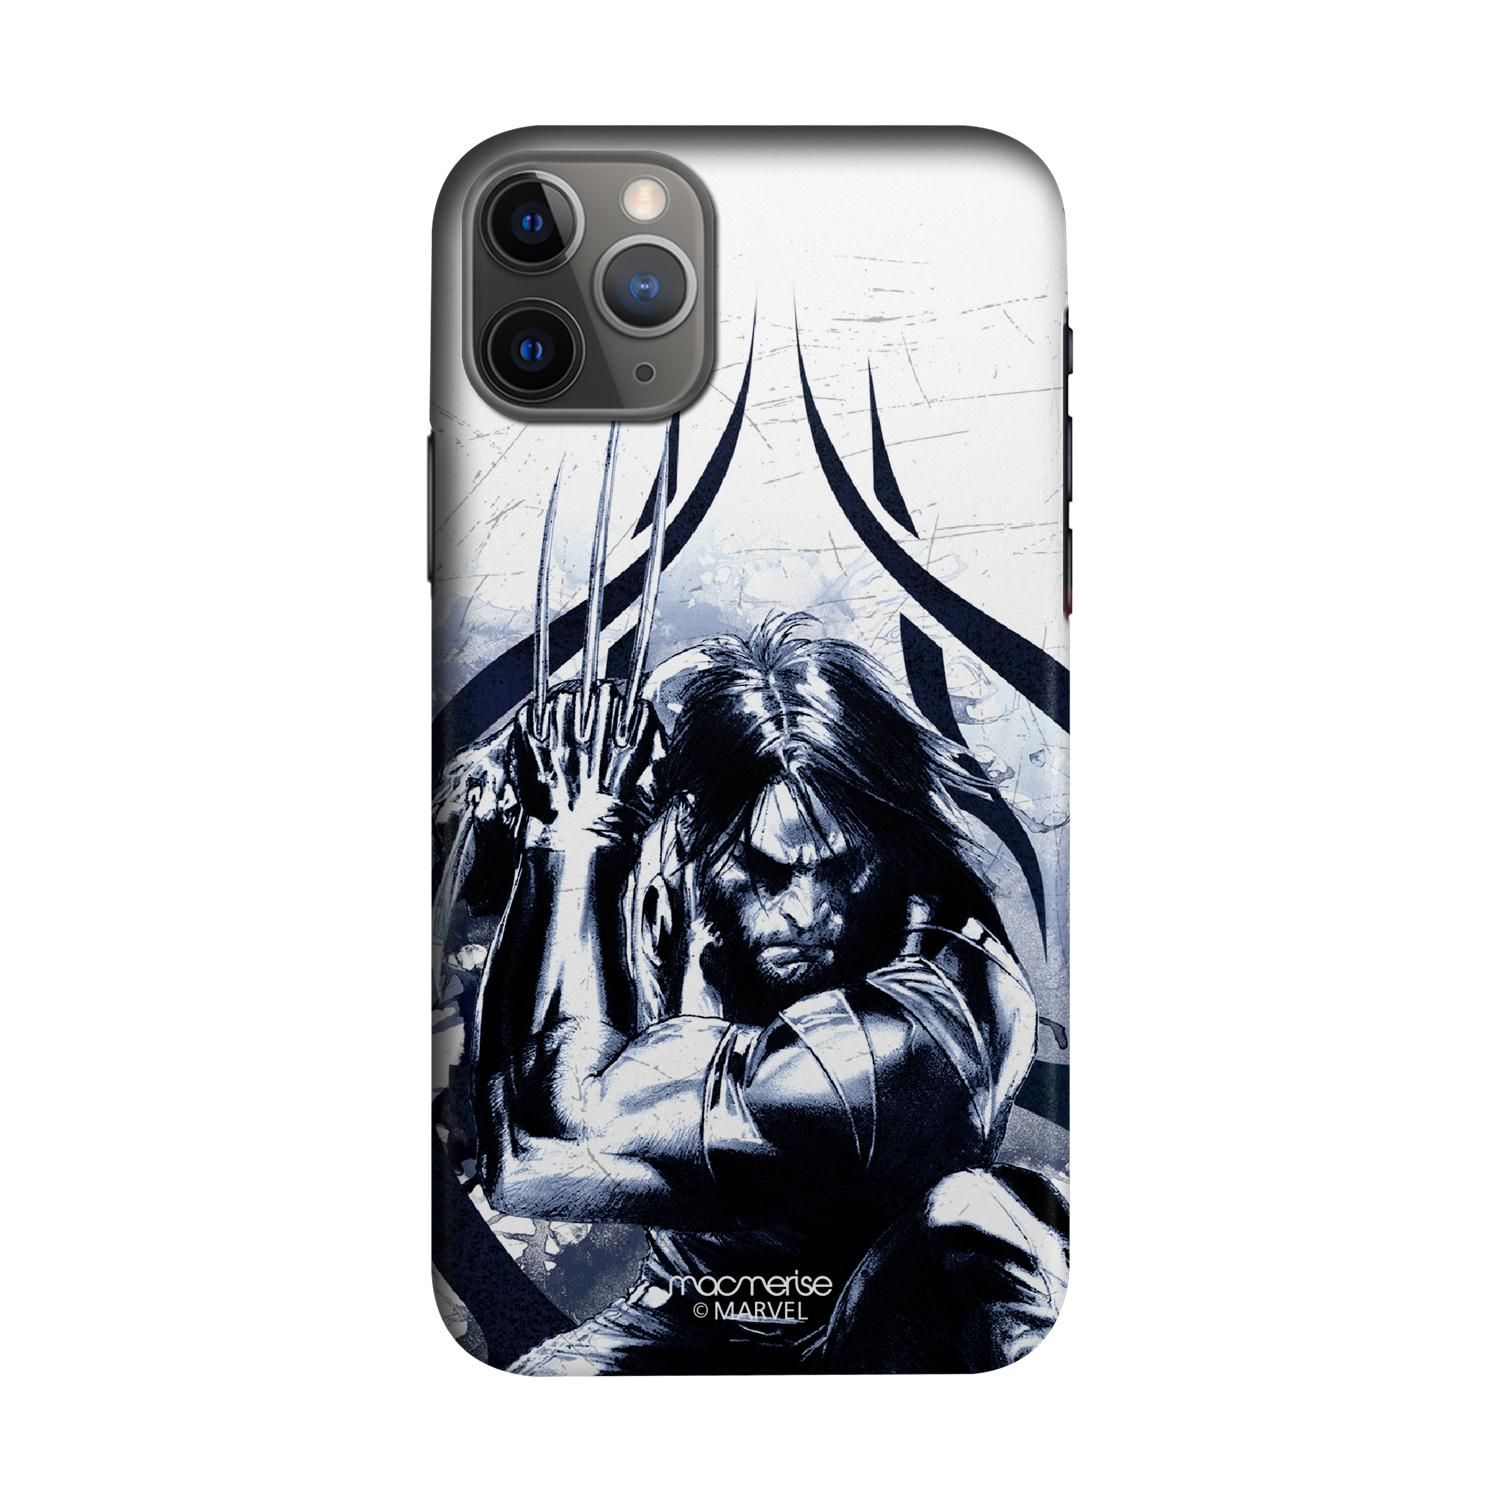 Buy Lethal Logan - Sleek Phone Case for iPhone 11 Pro Max Online